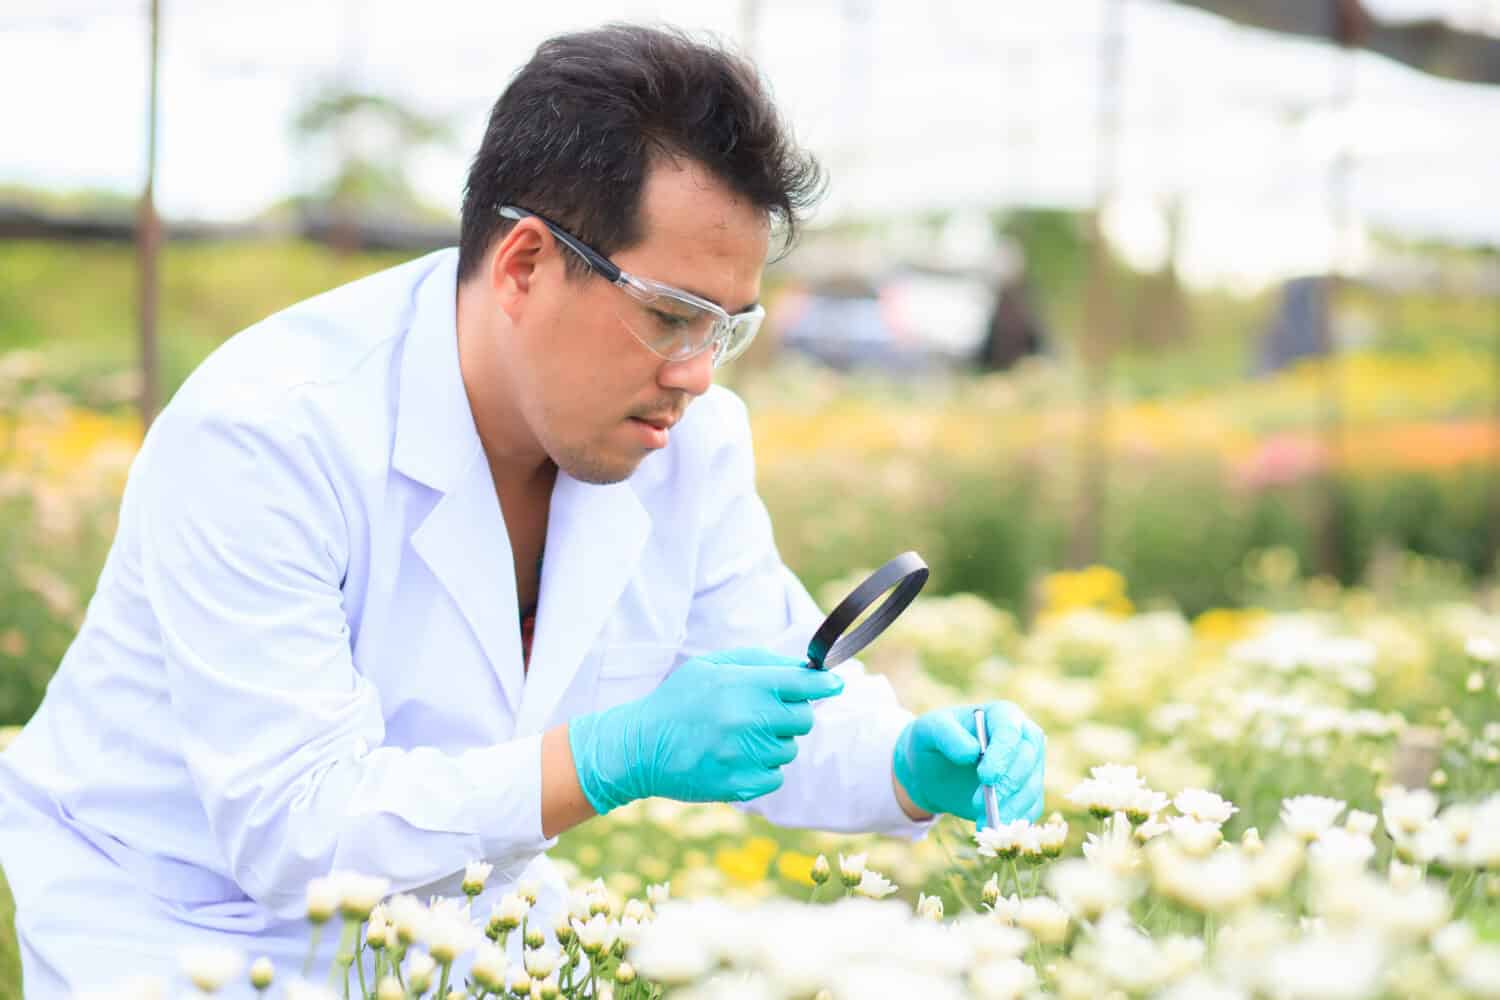 An Asian man, scientist and entomologist uses a magnifying glass to search for insect pests that grow flowers in the garden.